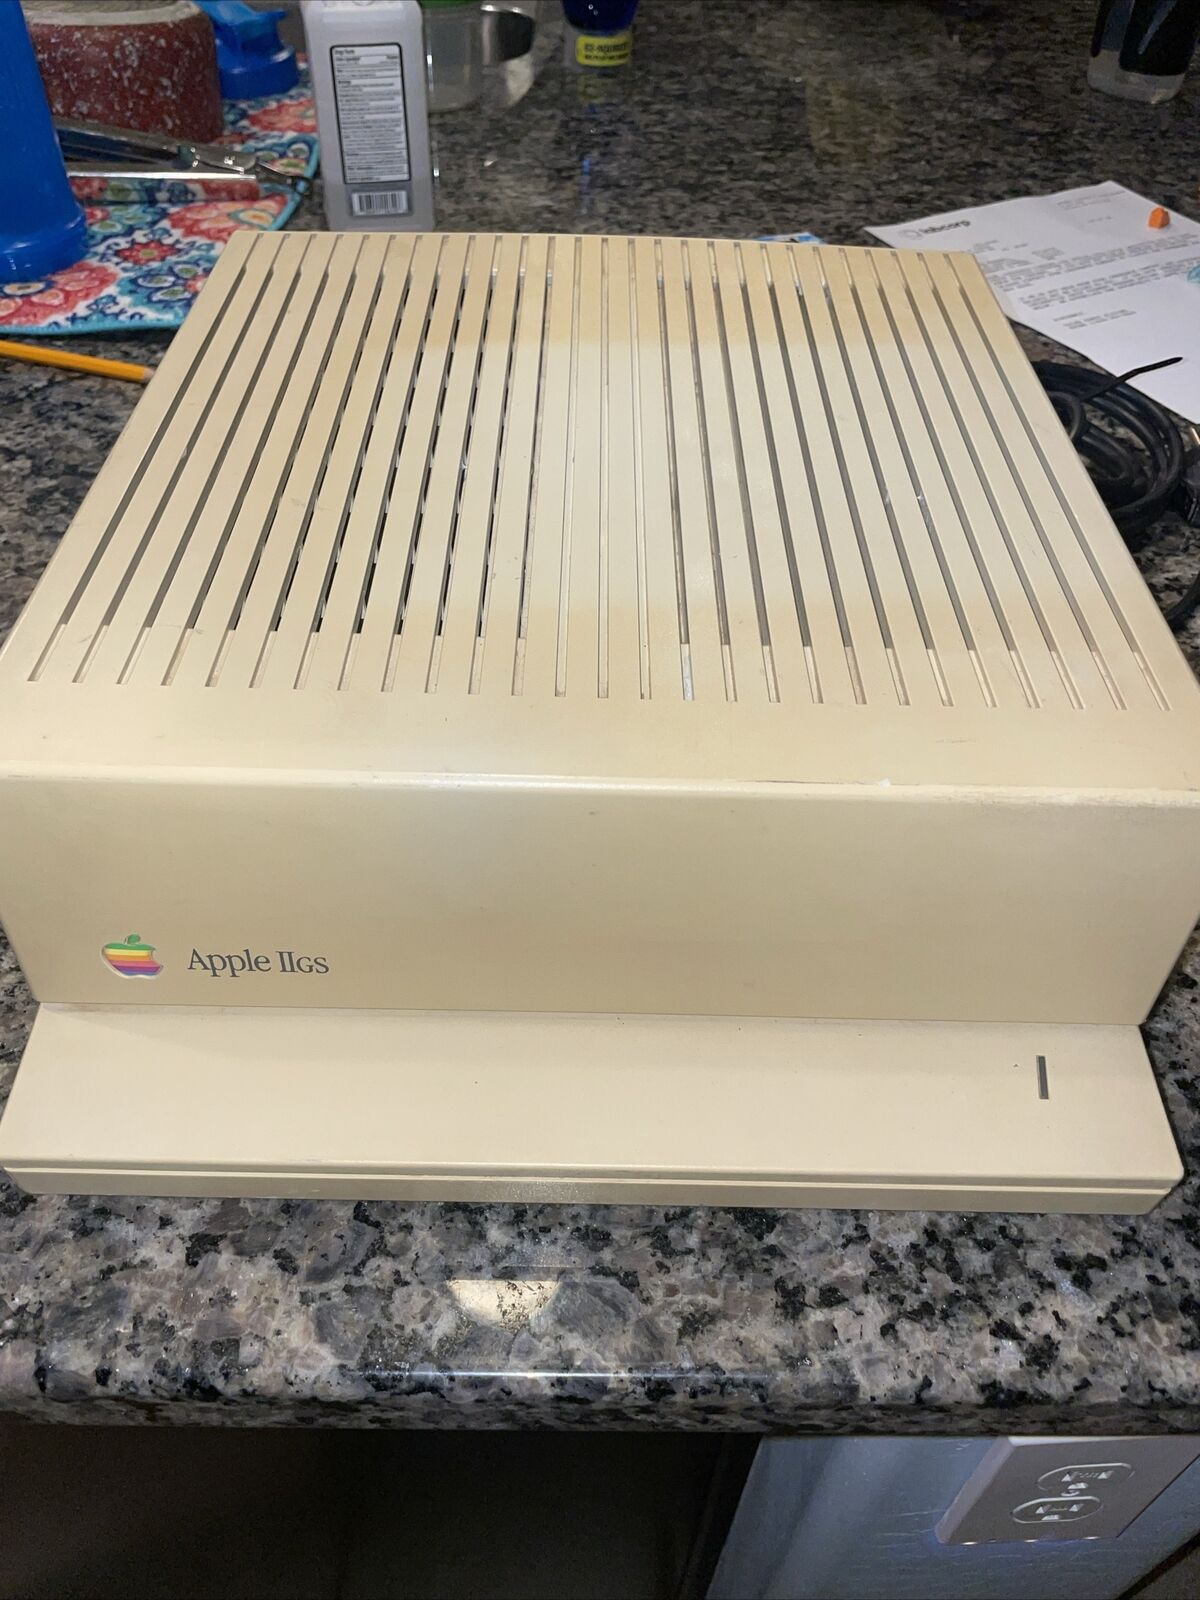 Apple II GS A2S6000 Vintage Computer Powers On